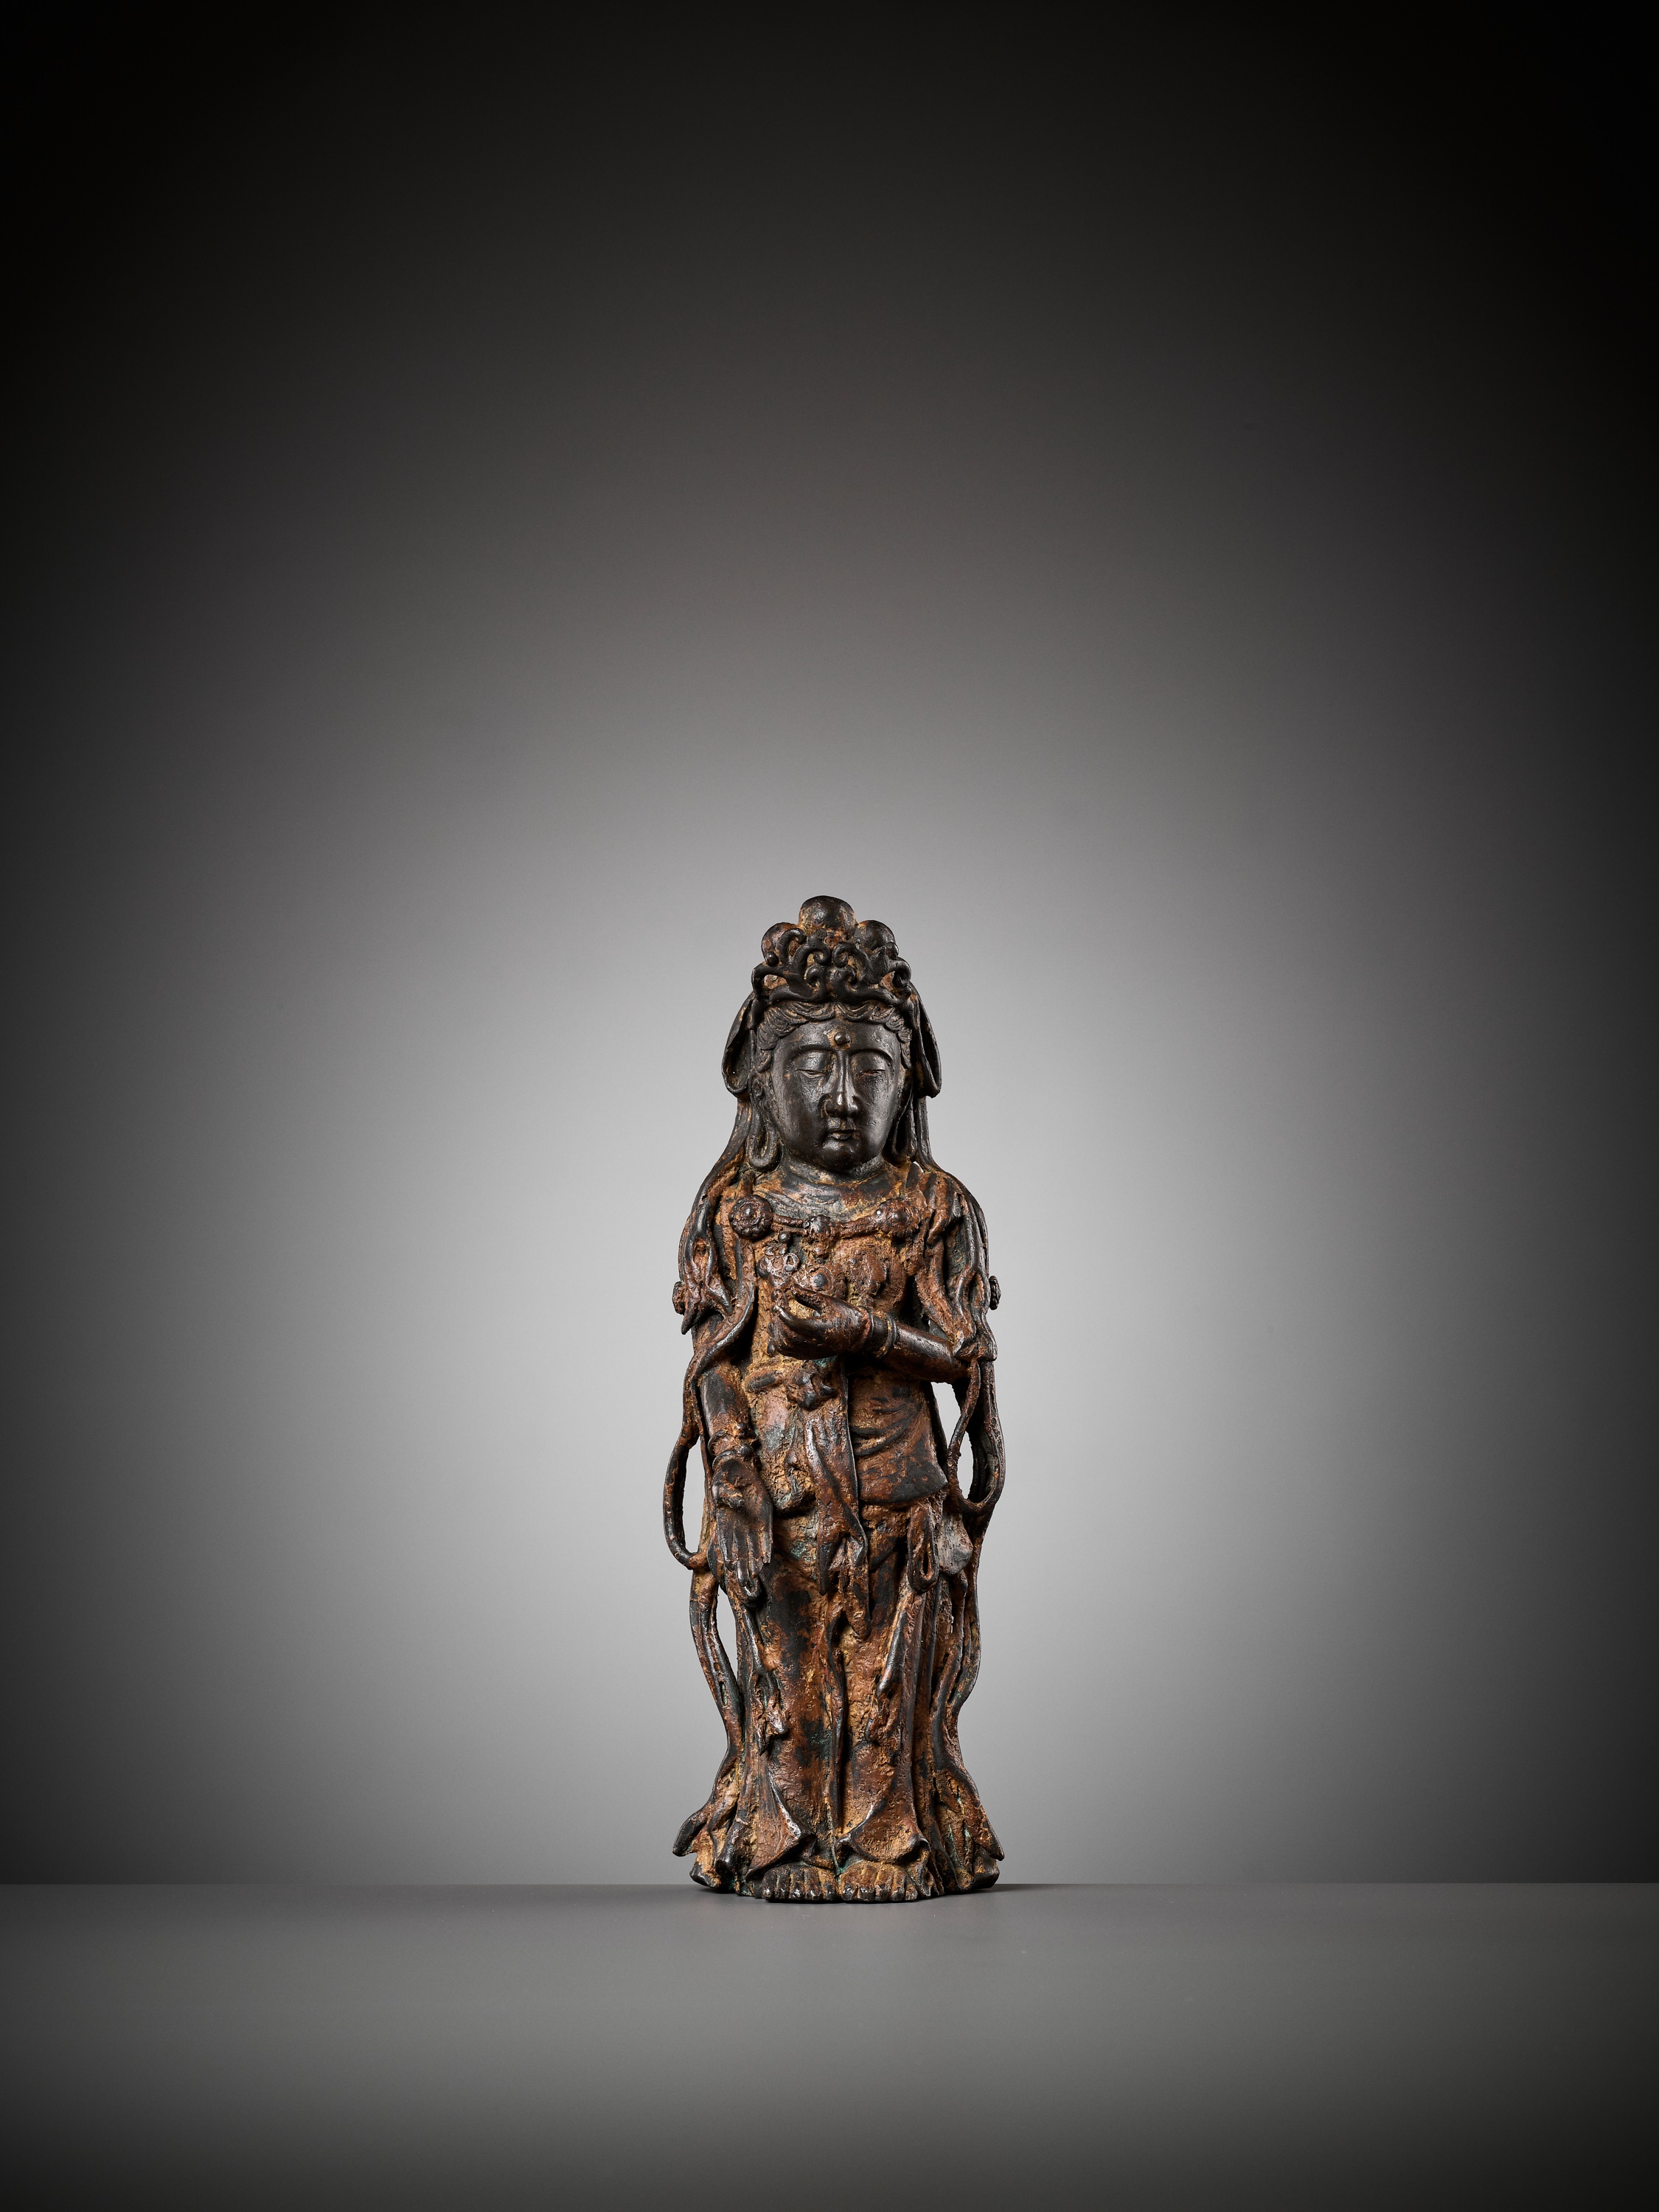 AN EXCEEDINGLY RARE BRONZE FIGURE OF GUANYIN, DALI KINGDOM, 12TH - MID-13TH CENTURY - Image 14 of 20